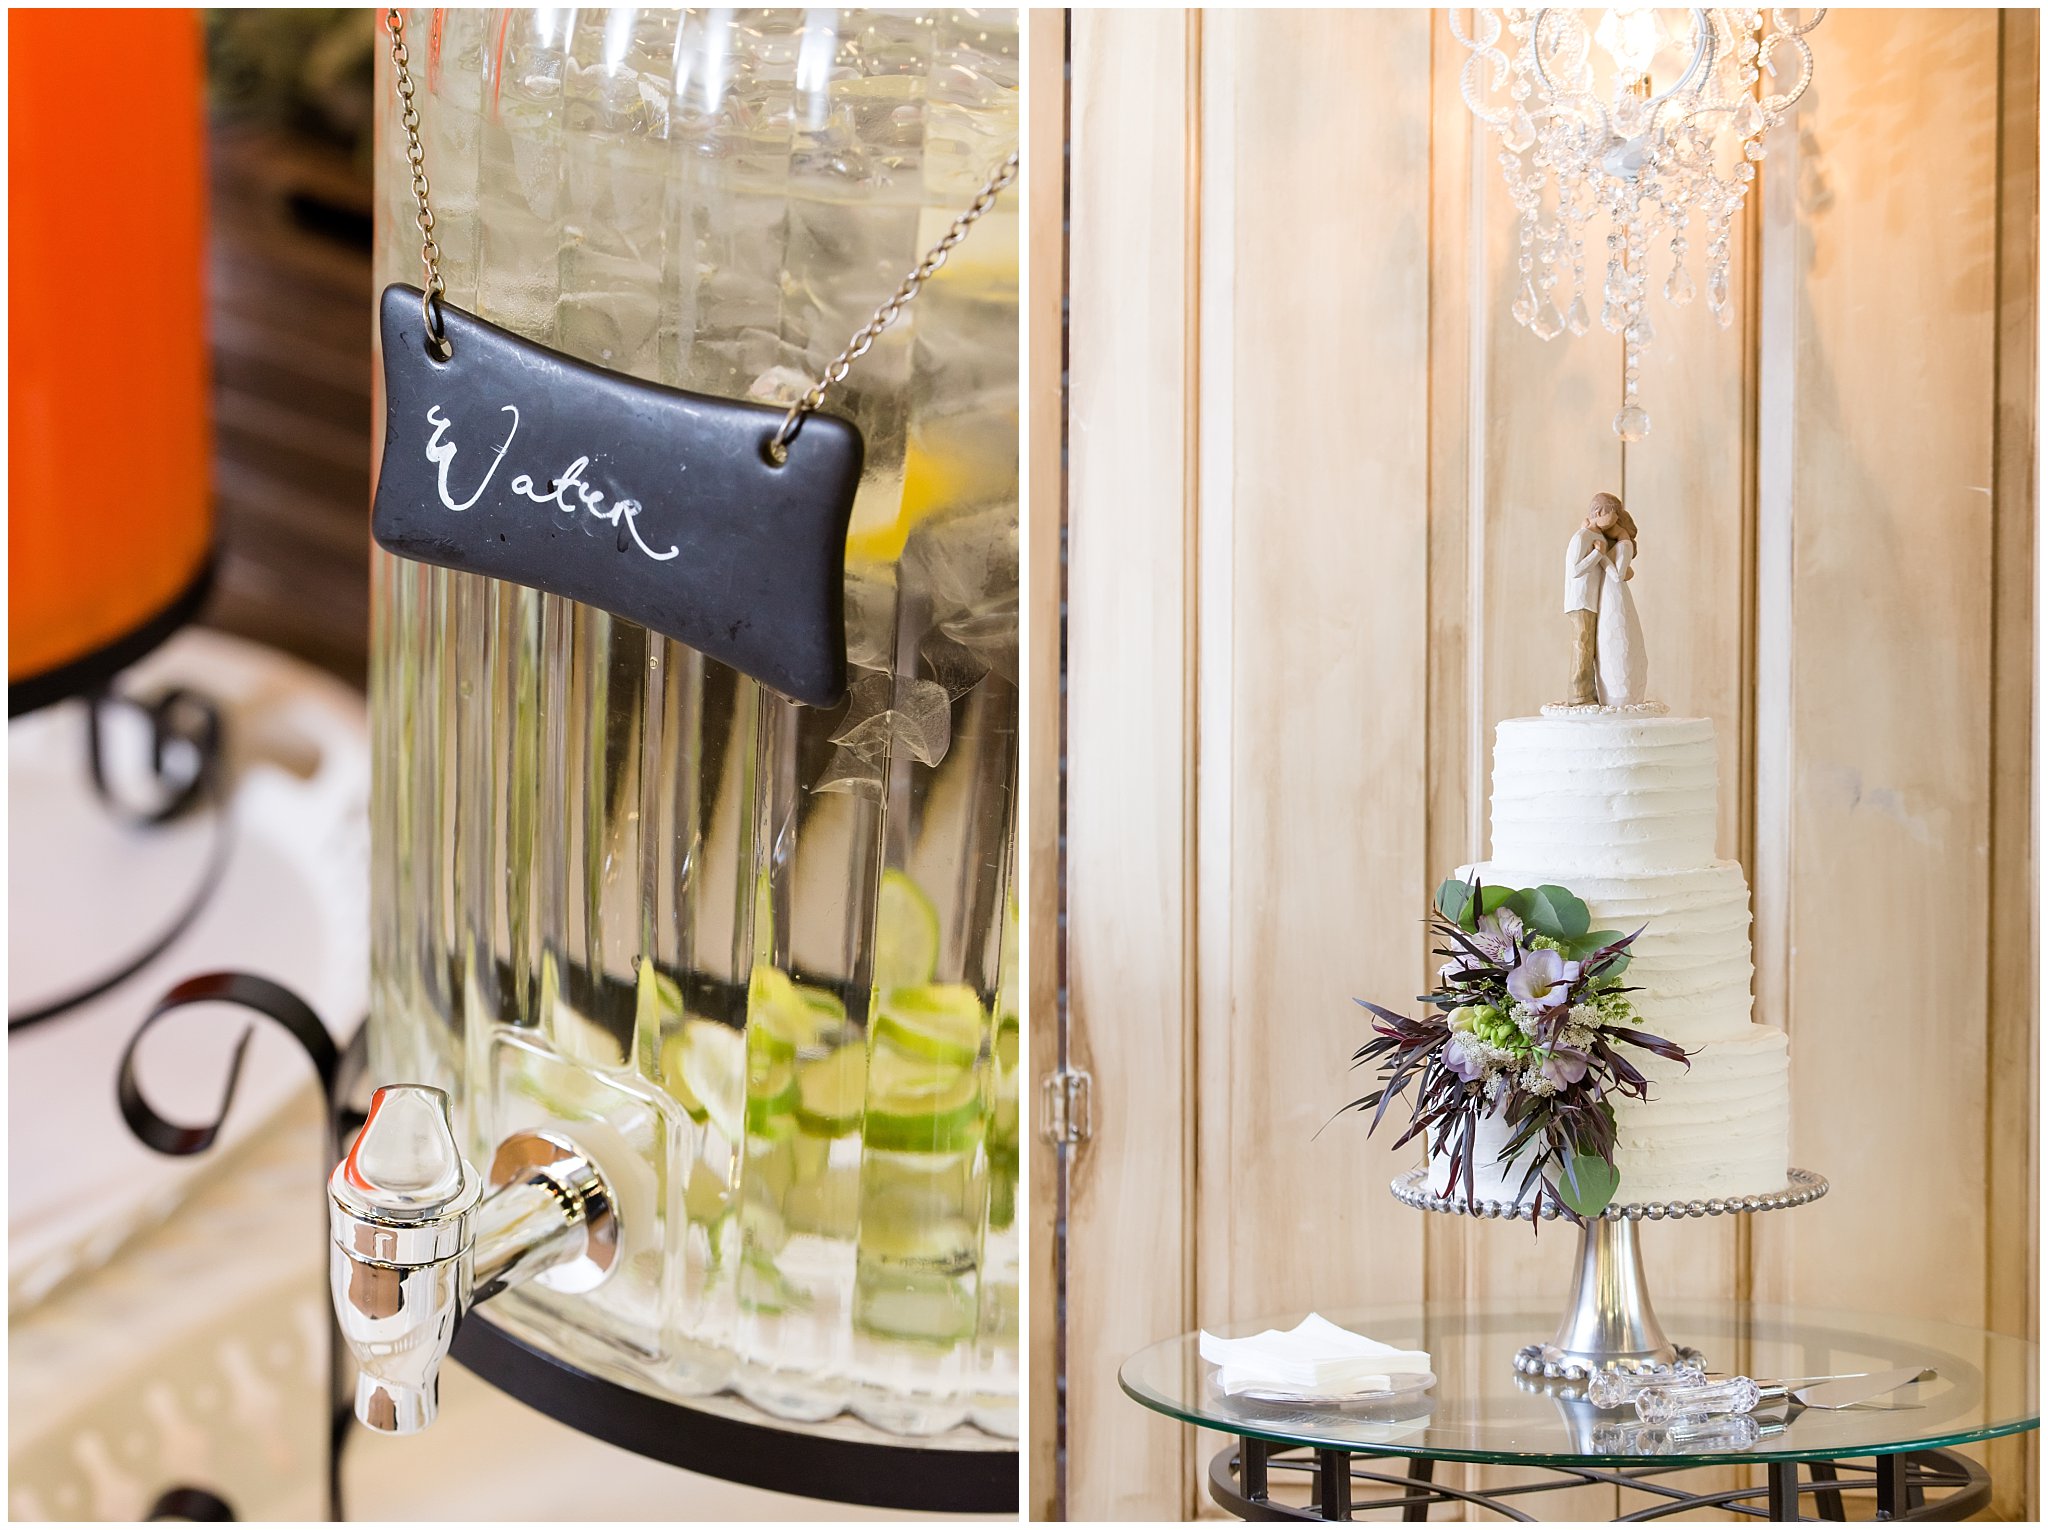 Wedding cake and water dispenser details | Wedding reception details | Jessie and Dallin Photography